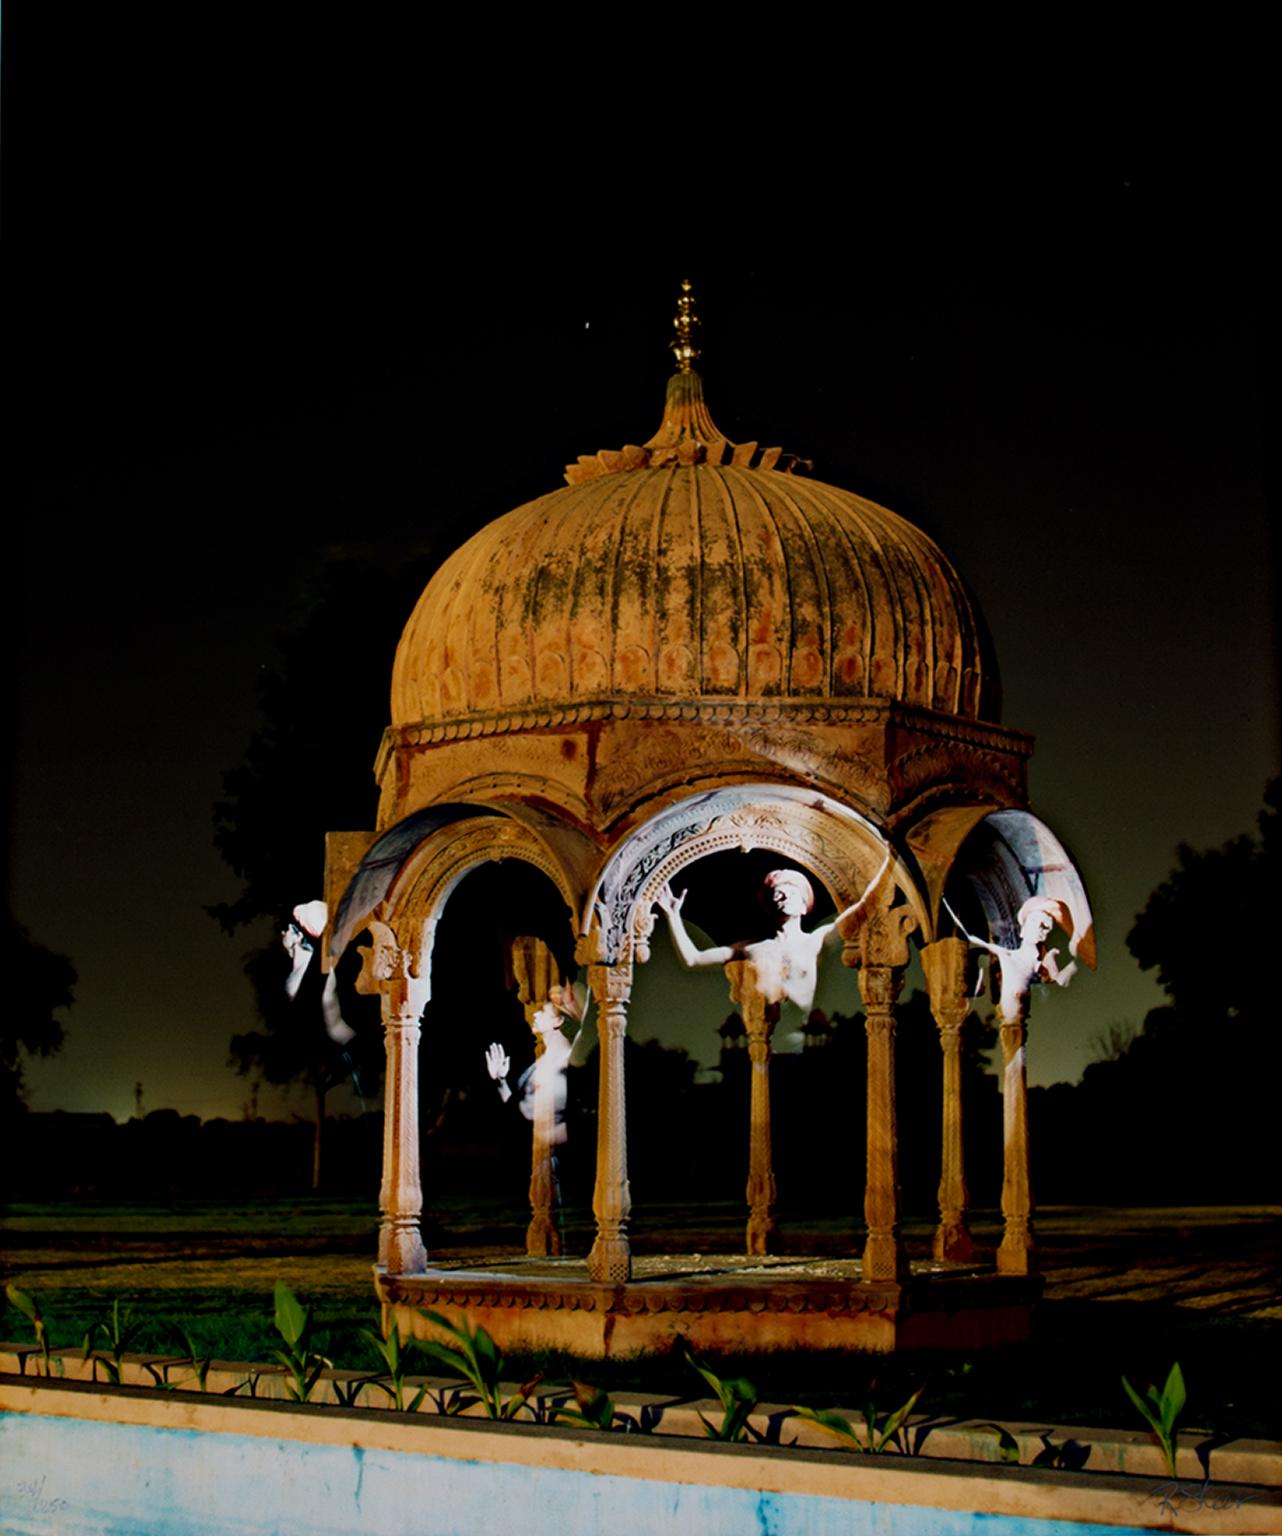 "India Spirits, Rajasthan, India," is an original fine-art performance photograph by Robert Kawika Sheer, signed in the lower right and numbered in the lower left.  The piece depicts an Indian shrine in Rajasthan, "city of kings," composed of a